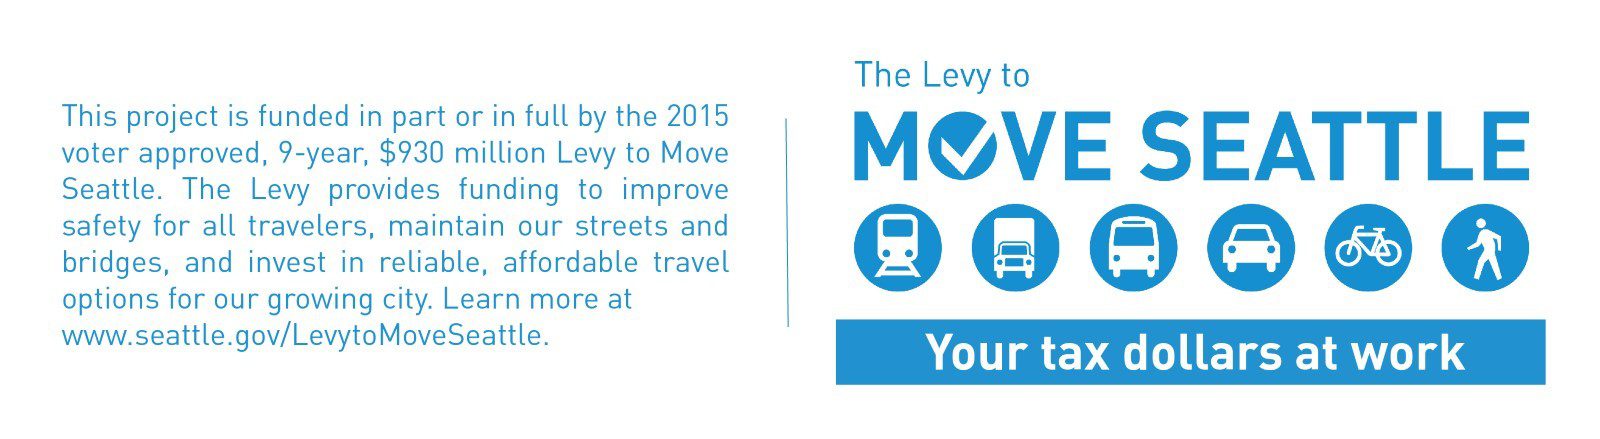 Funding comes from the 2015 voter-approved, 9-year Levy to Move Seattle, which provides funding to improve safety for all travelers, maintain streets and bridges, and invest in reliable, affordable travel options for a growing city.